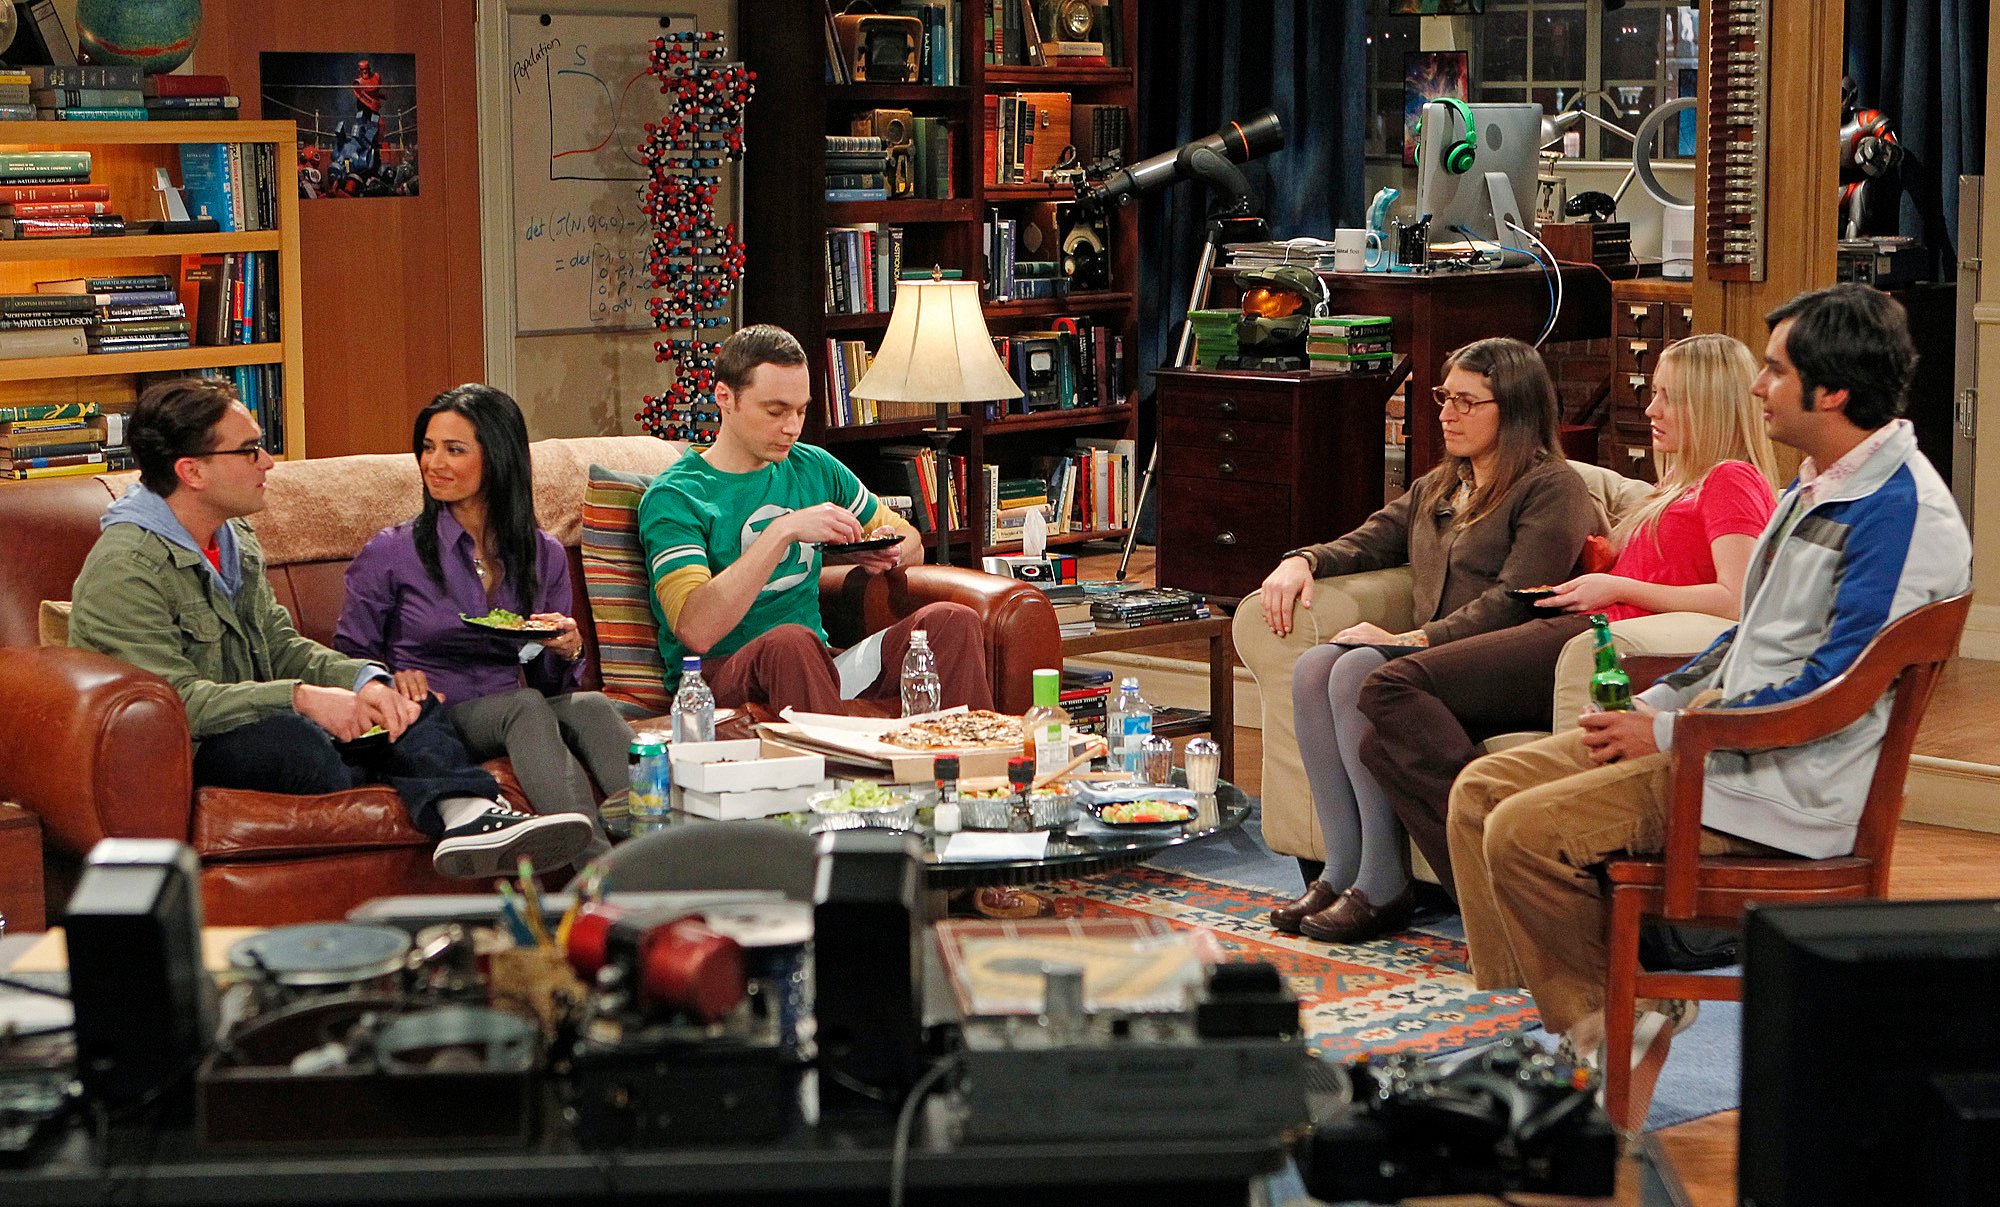 The cast of 'The Big Bang Theory' enjoys a meal in Leonard and Sheldon's living room